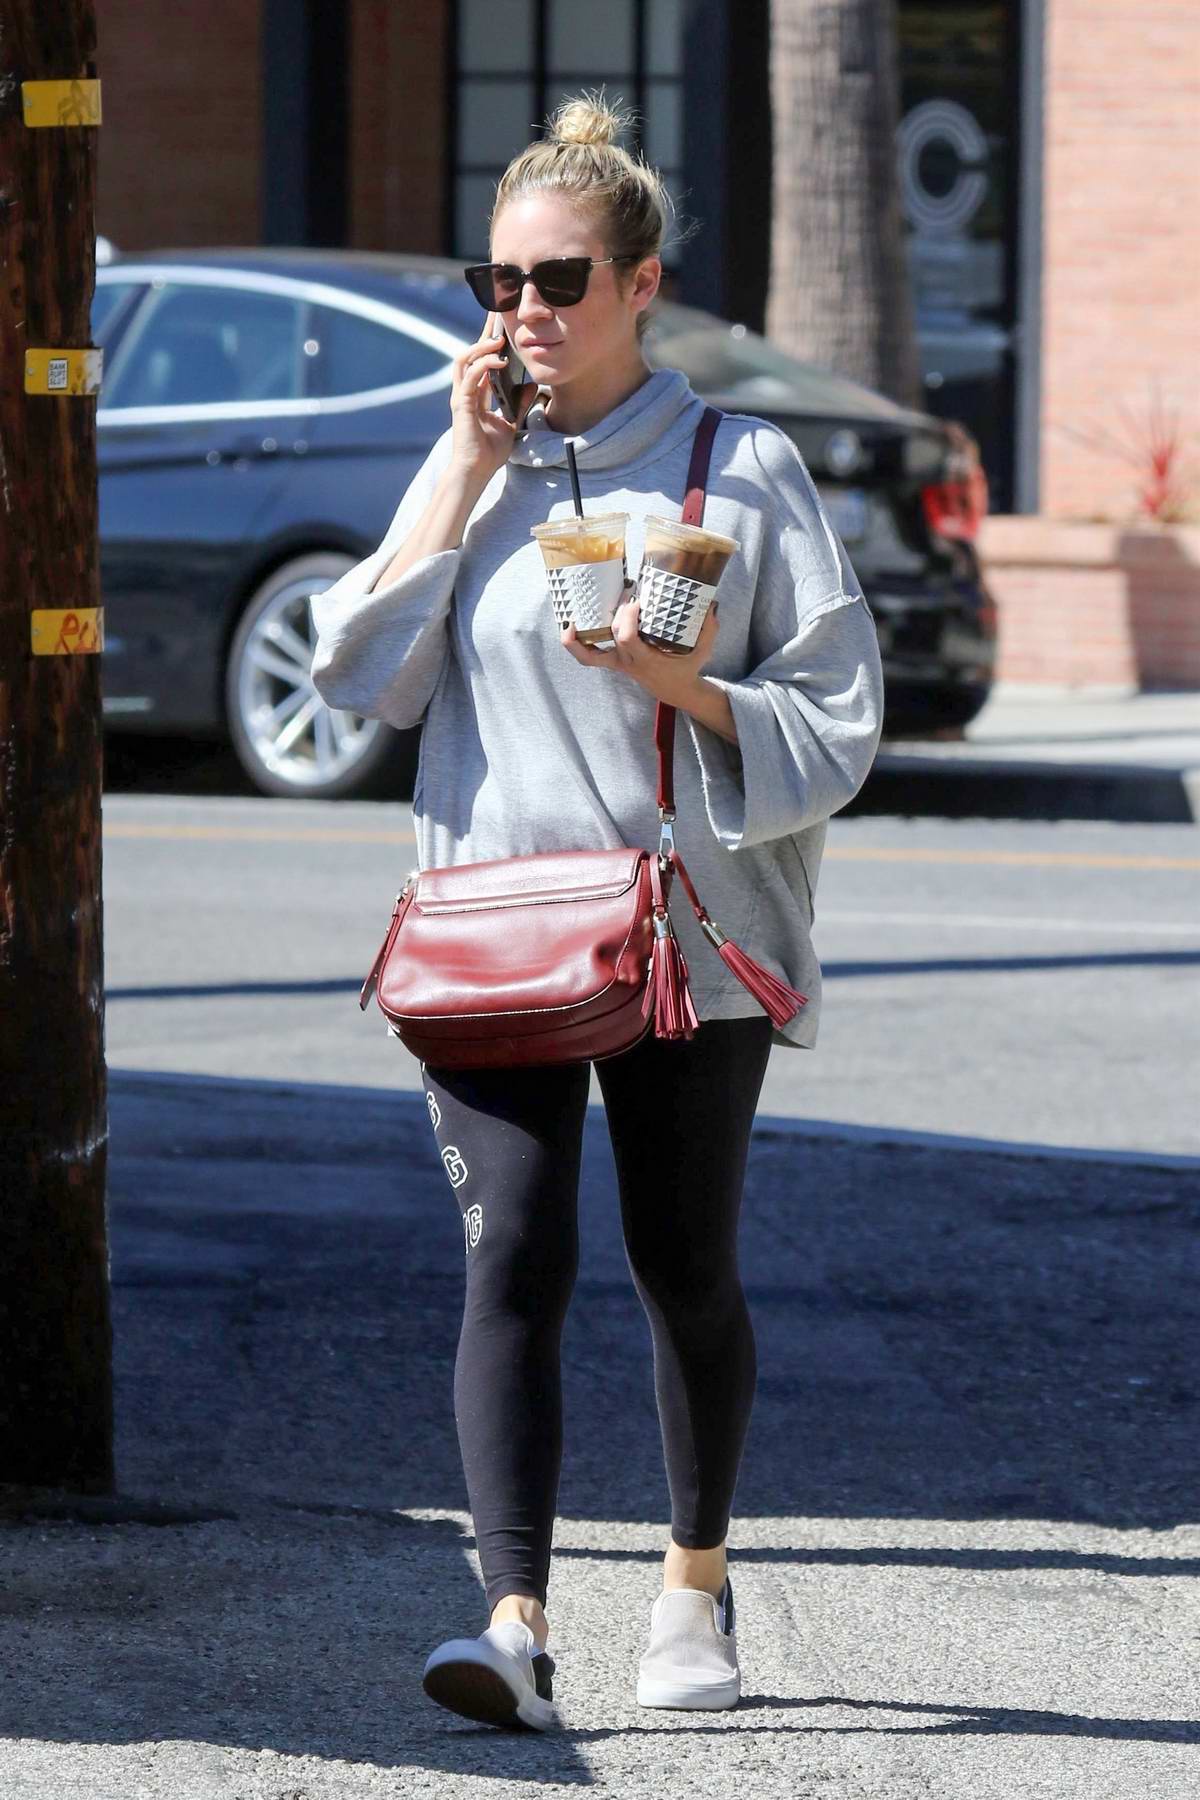 Brittany Snow steps out in grey sweatshirt and black leggings as